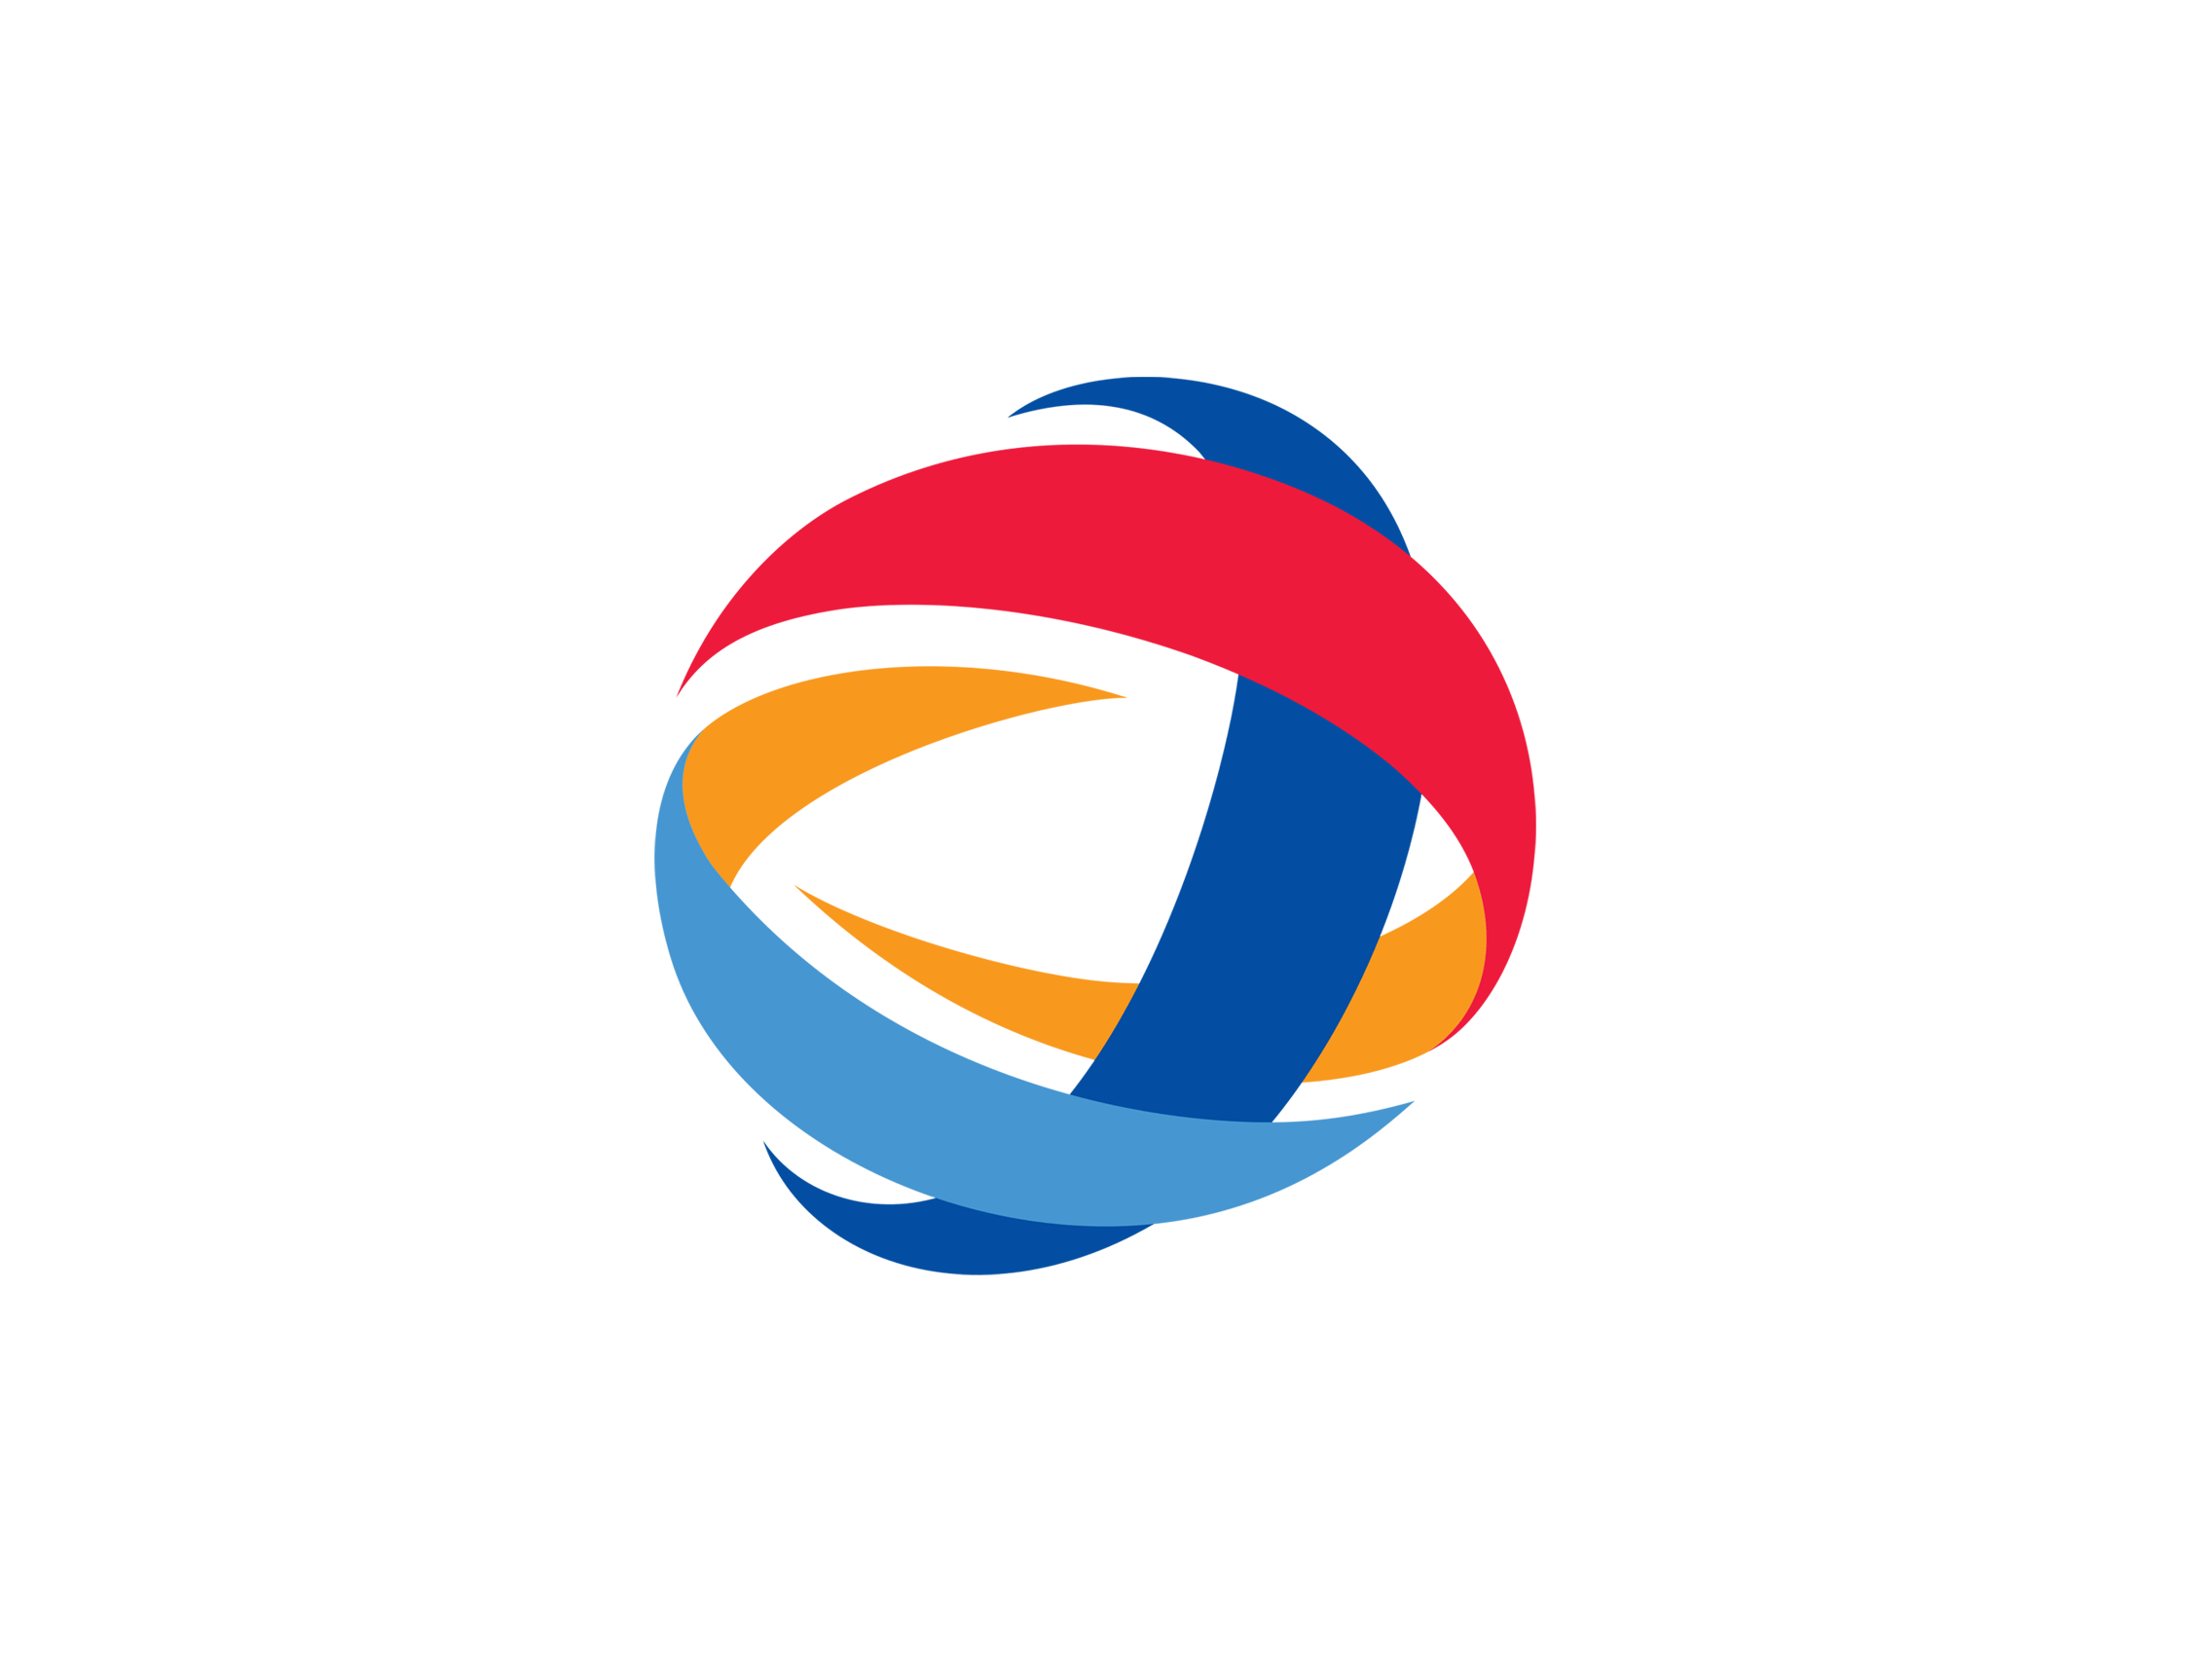 Red Ball Company Logo - Red blue and orange Logos